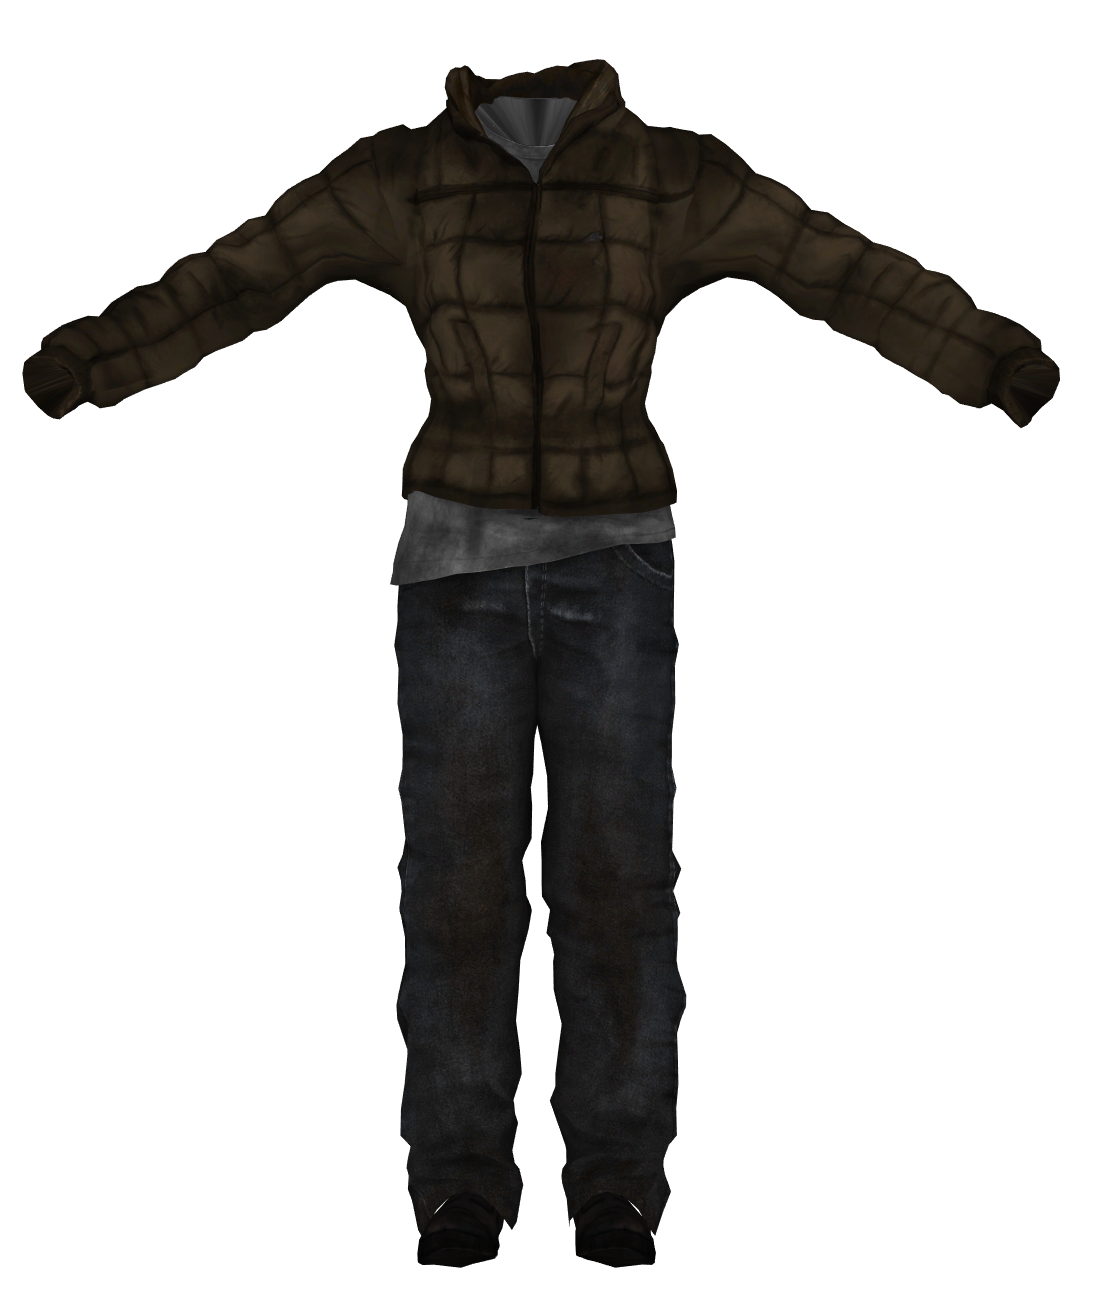 Casey's old hoodie | Fallout: The Frontier Wiki | Fandom